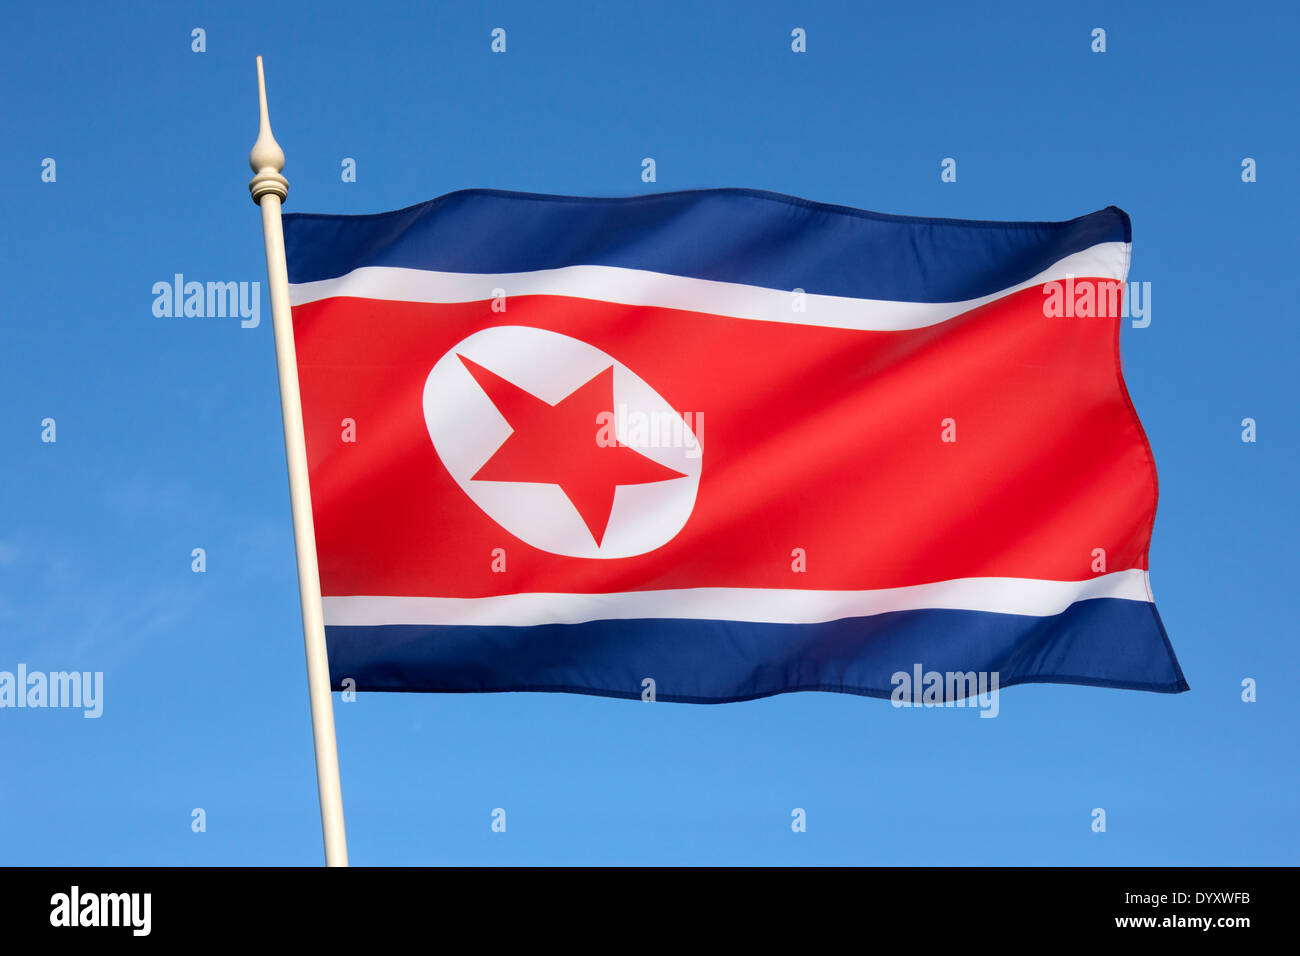 The flag of North Korea was adopted on 8 September 1948, as the national flag and ensign of this isolationist Stalinist state. Stock Photo